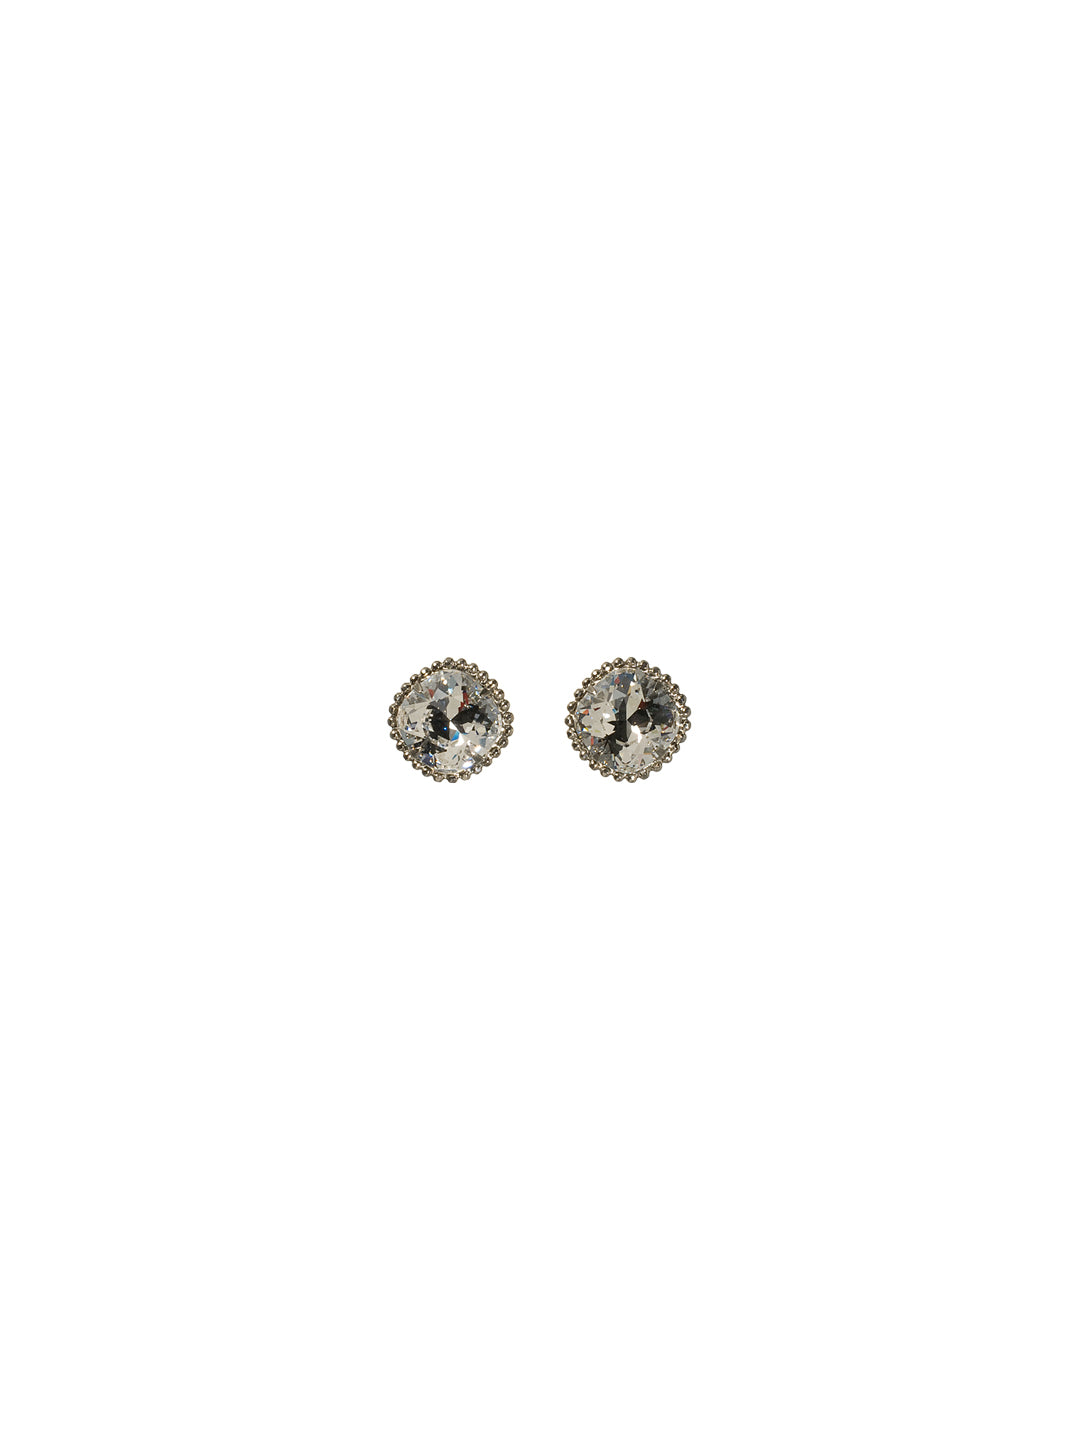 Cushion-Cut Solitaire Stud Earrings - EBX10ASSNB - All around allure; the Cushion-Cut Solitaire Stud Earring features a rounded-edge, cushion cut stone that is encircled by a vintage inspired decorative, edged border. A post backing ensures comfortable, everyday wear. From Sorrelli's Snow Bunny collection in our Antique Silver-tone finish.